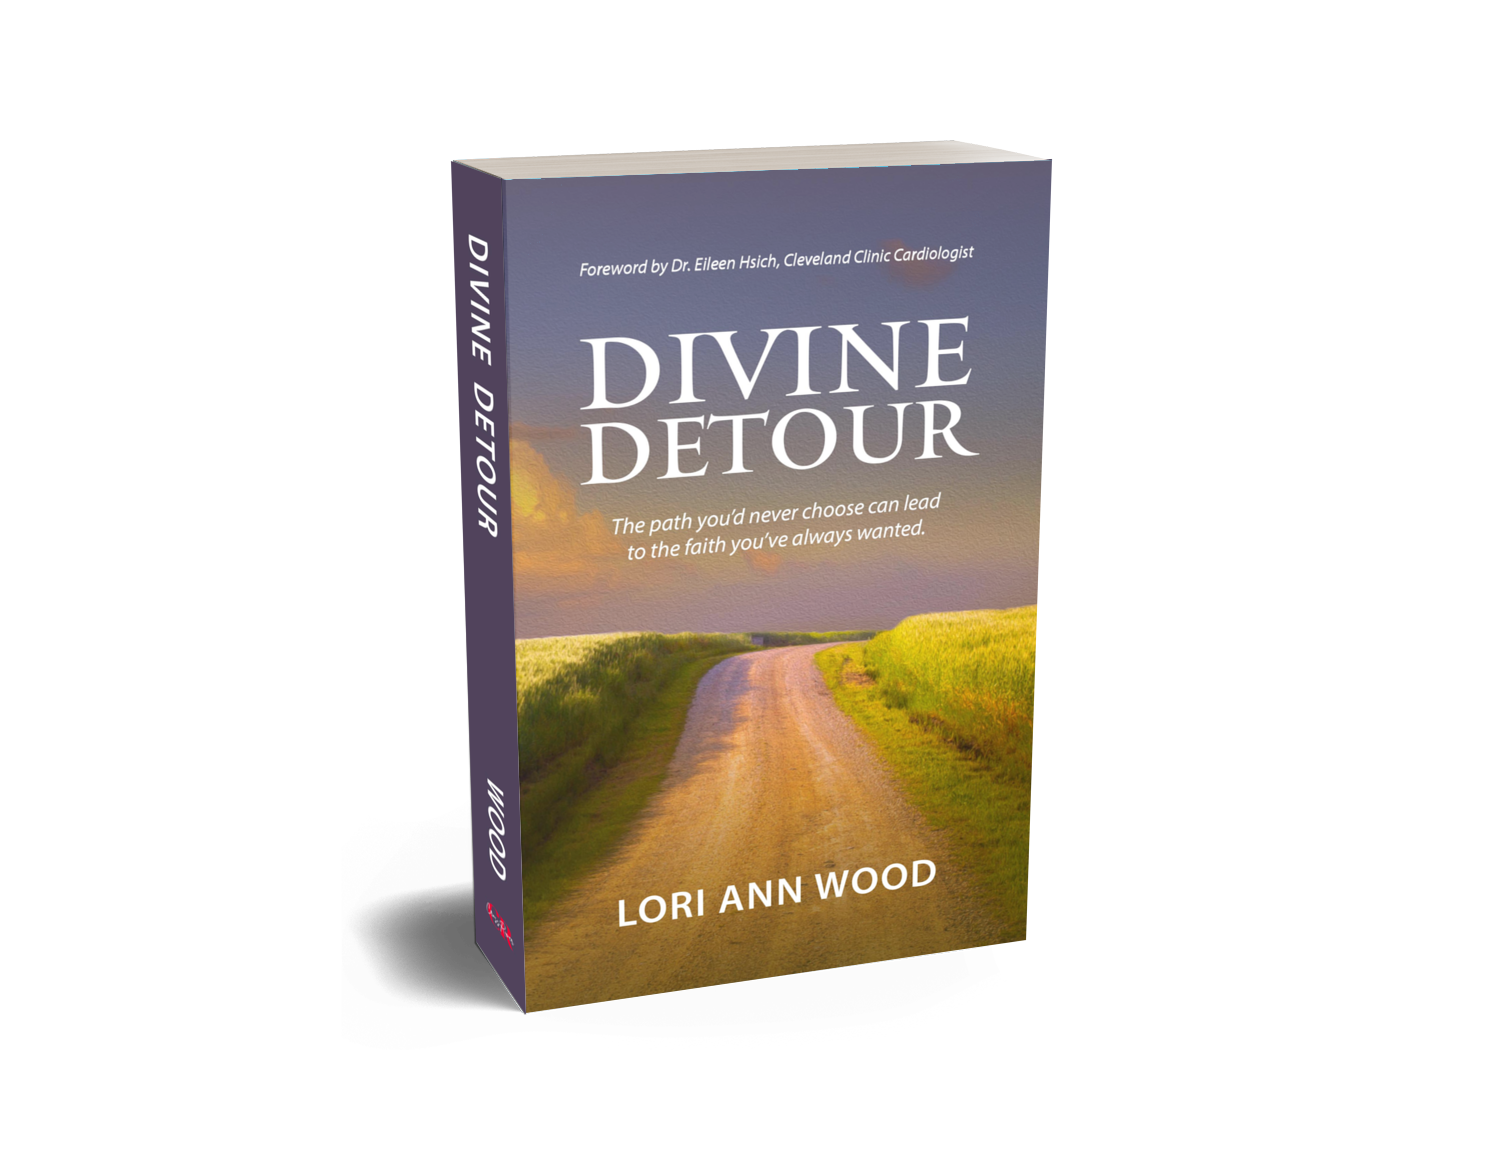 Divine Detour the path you'd never choose can lead to the faith you've always wanted by Lori Ann Wood published by Christian publisher CrossRiver Media Why trust God